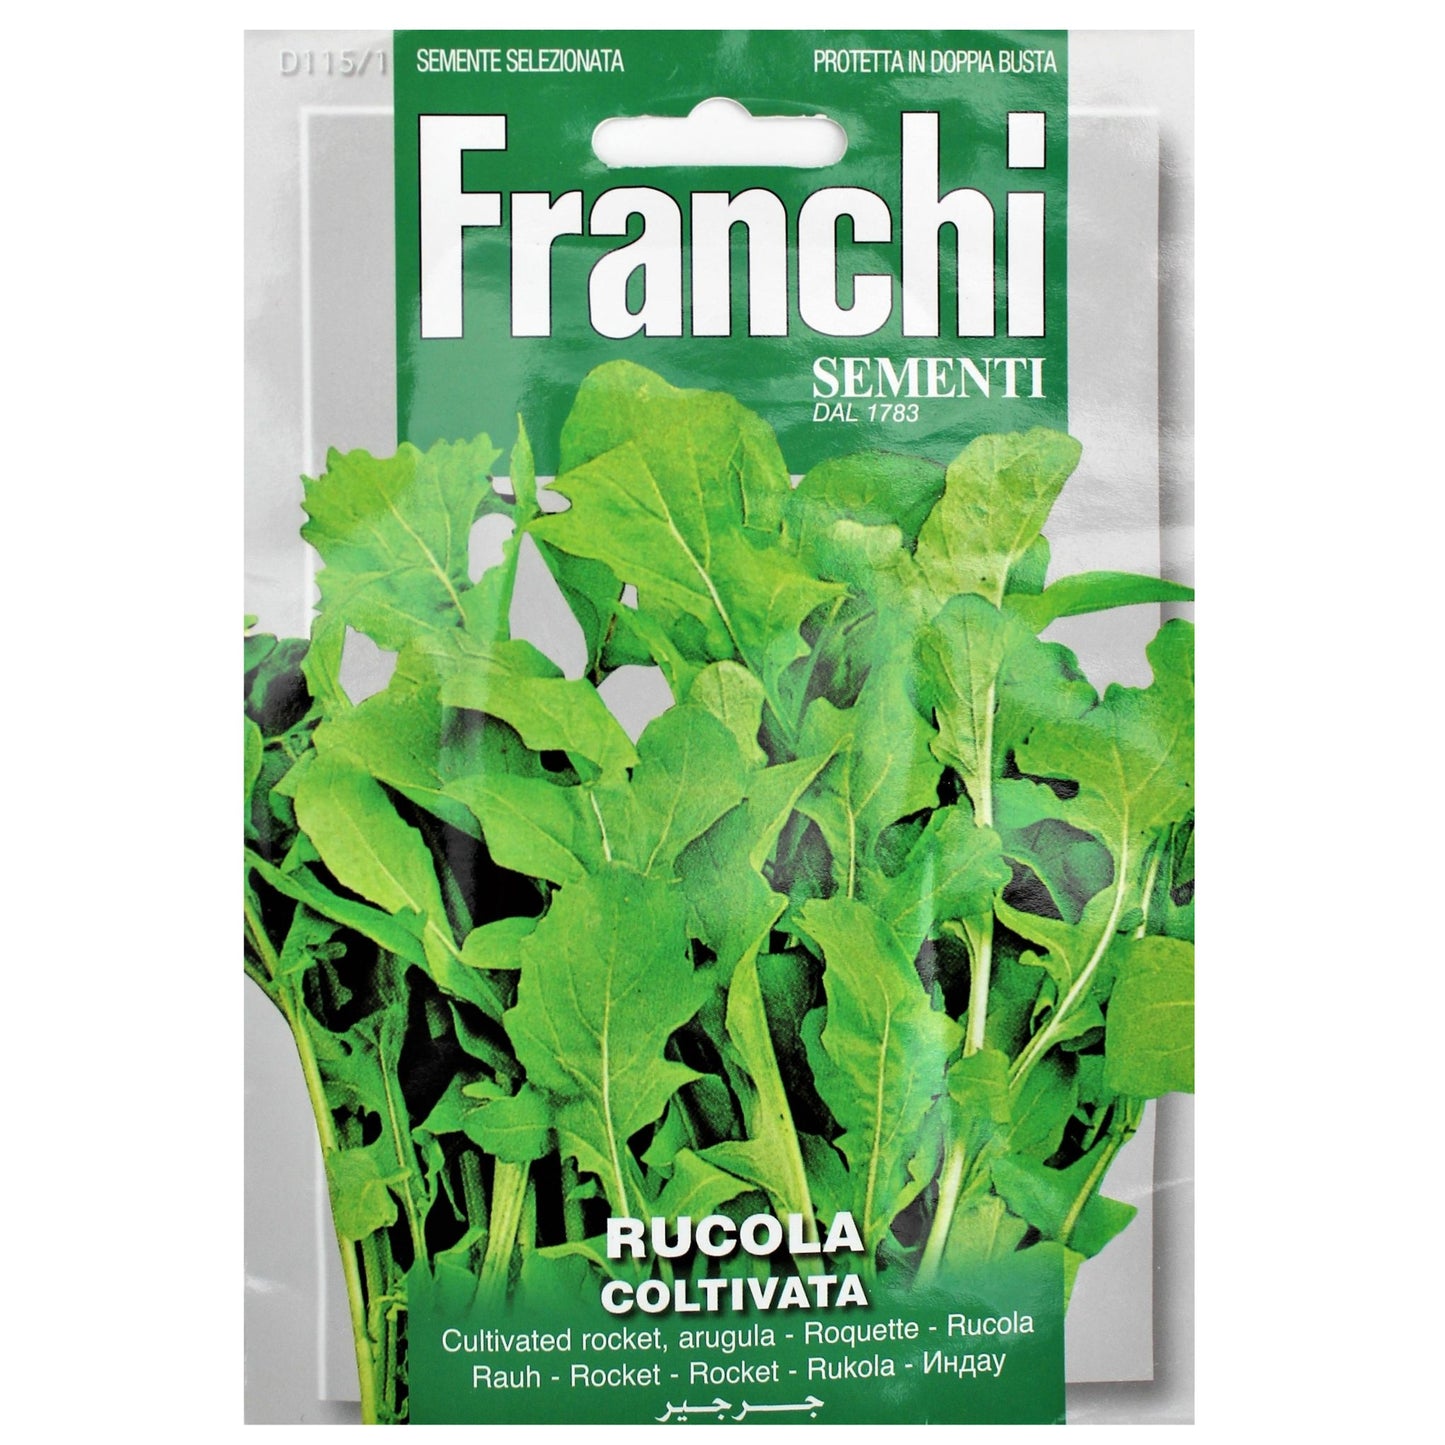 Franchi Seeds - Rucola Coltivata / Cultivated Rocket